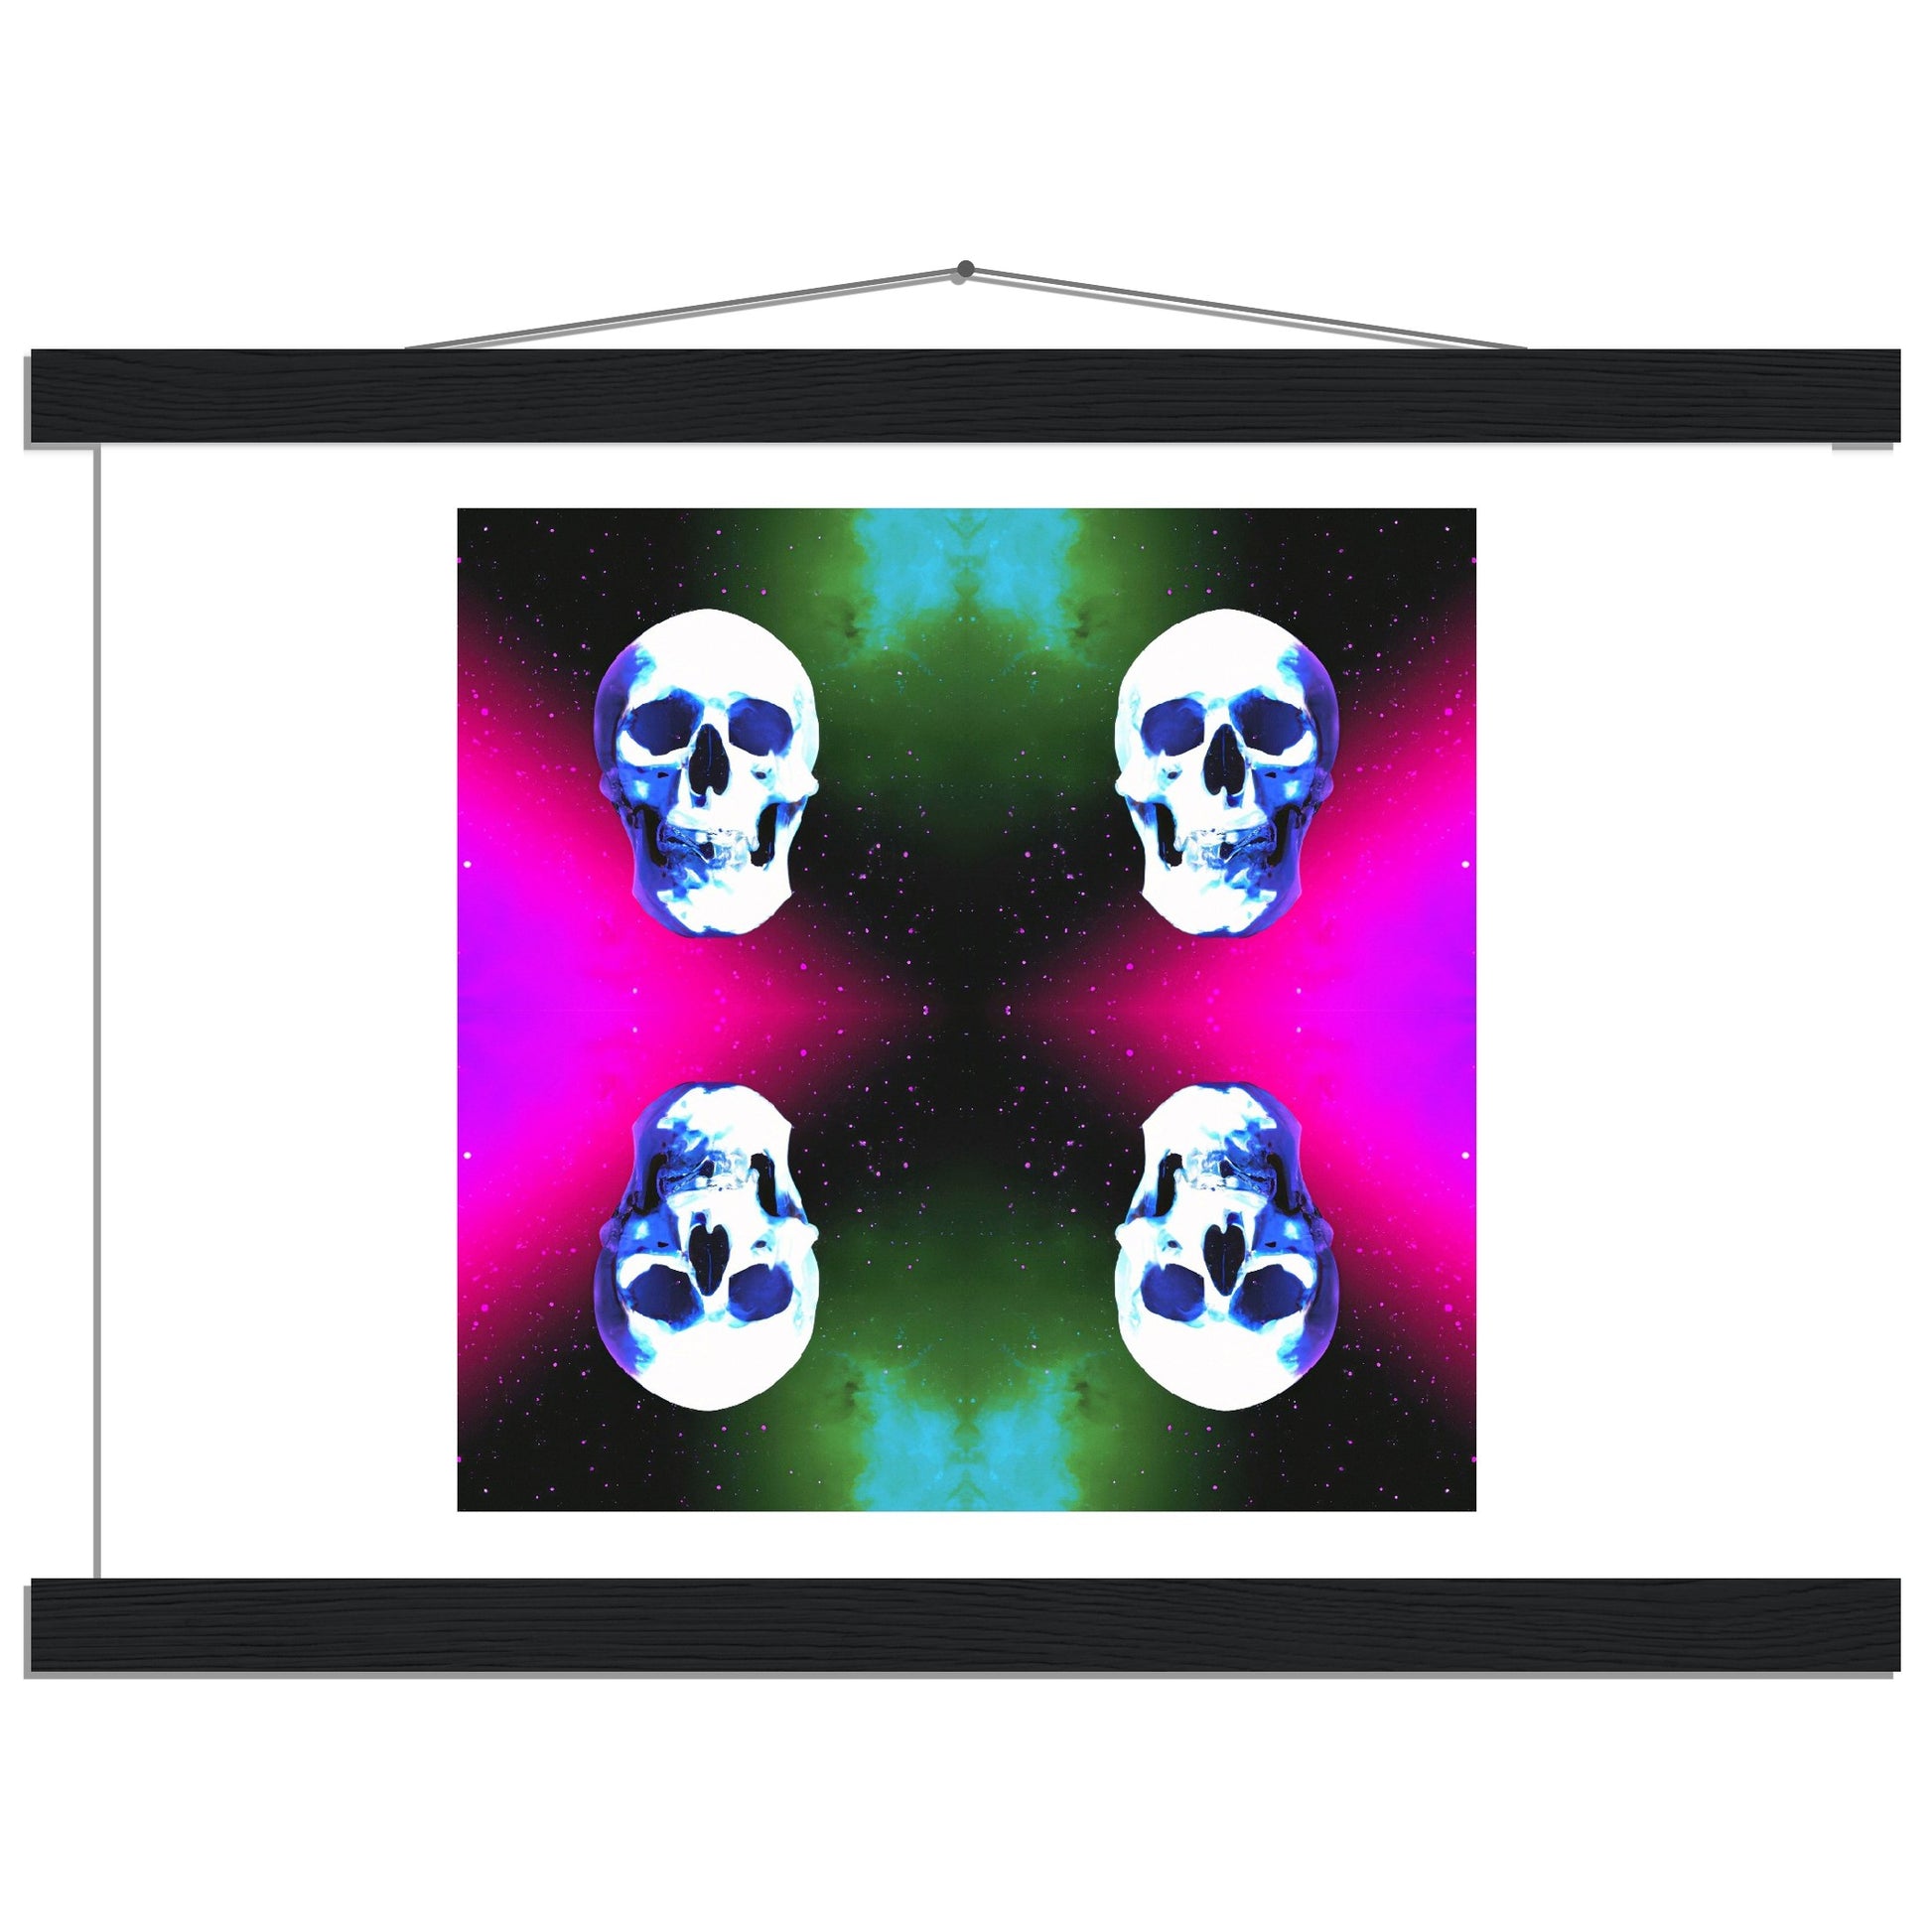 Nebula Skull 1 Classic Matte Paper Poster with Hanger This poster with hangers has an image featuring a skull in a cool cosmic nebula and the image is mirrored.  